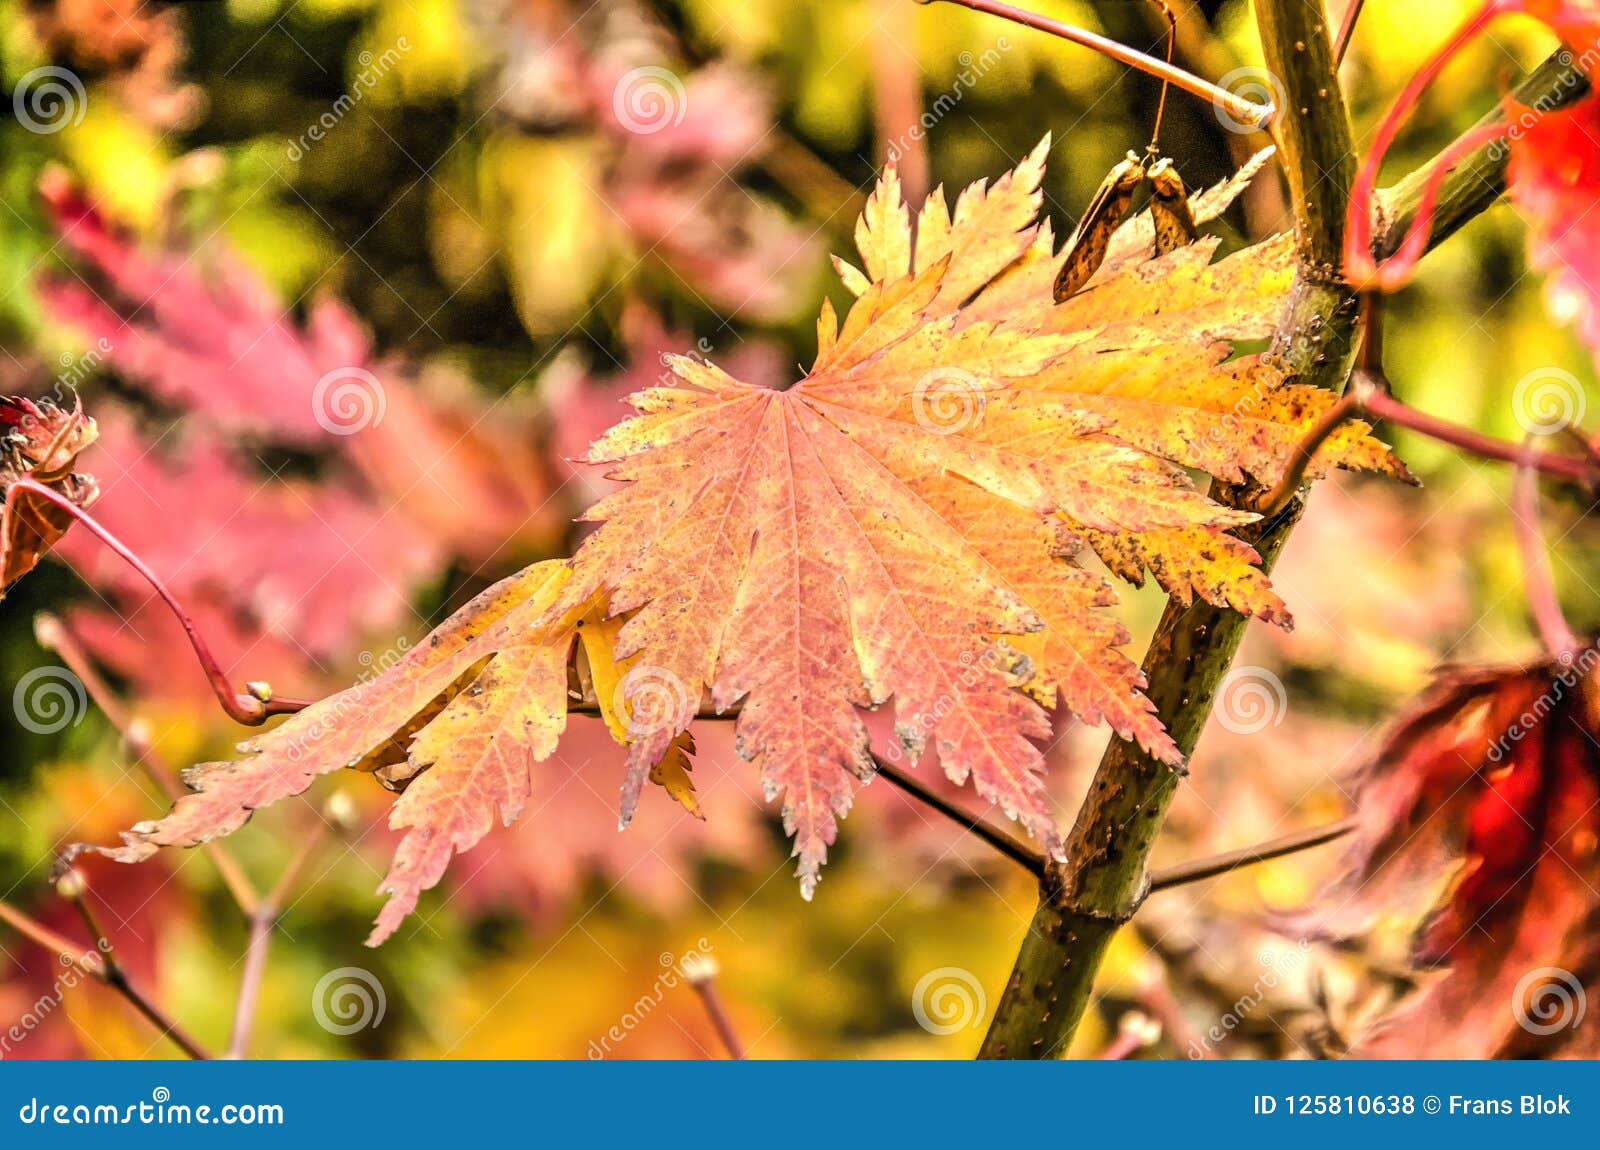 Fiery acer leaf in autumn stock photo. Image of fall - 125810638